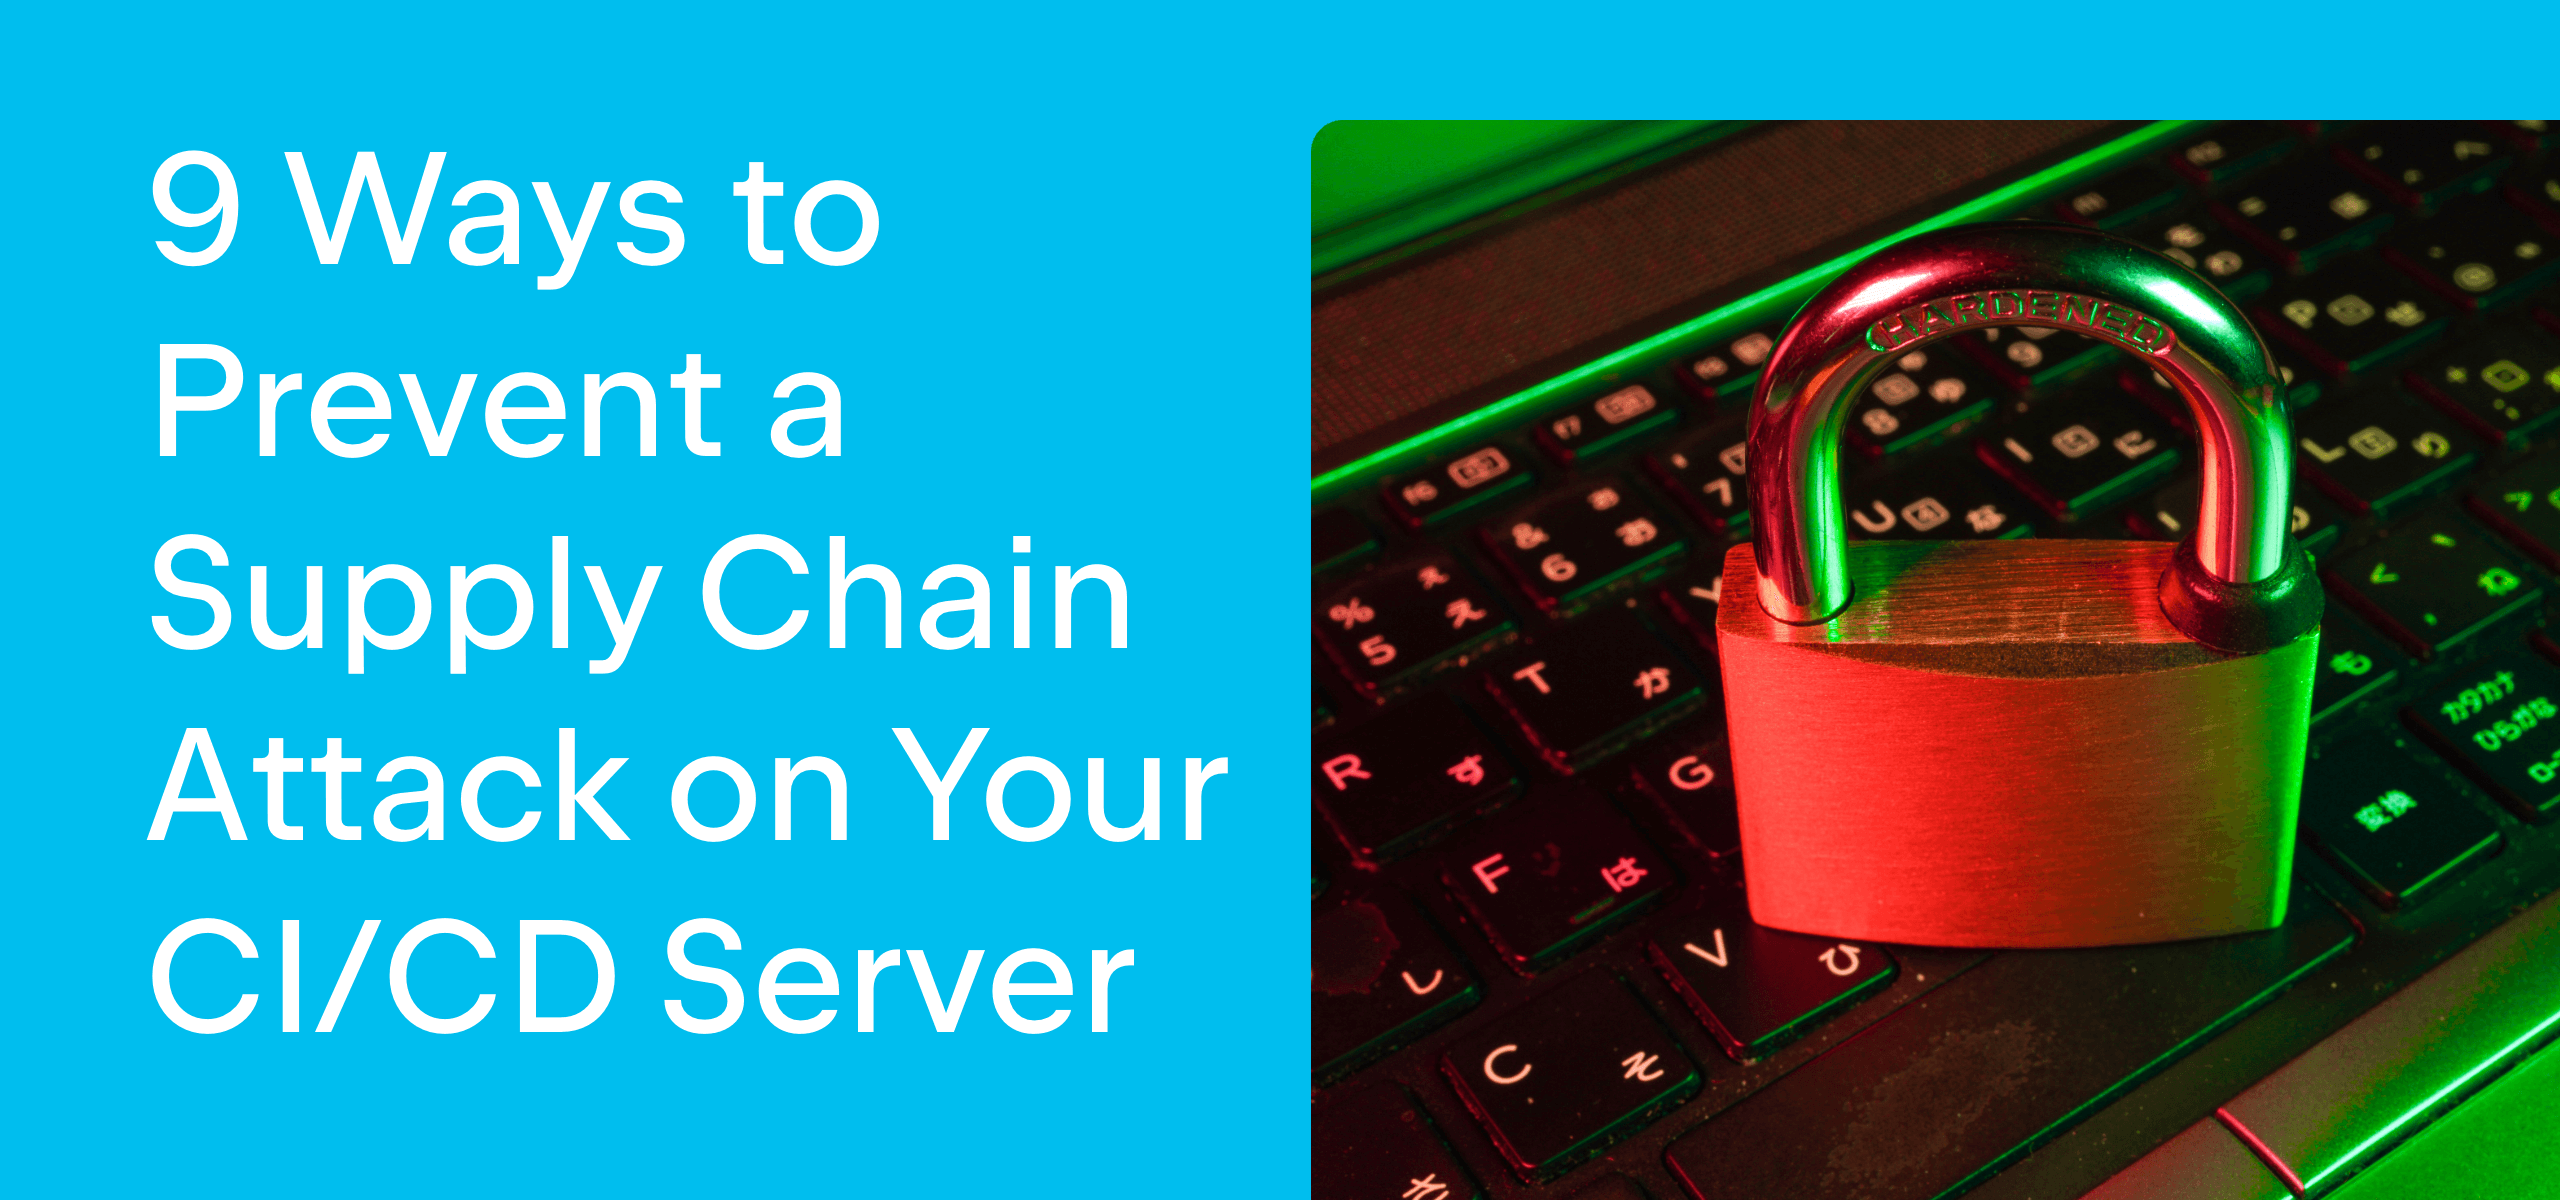 9 ways to prevent a supply chain attack on your ci/cd server